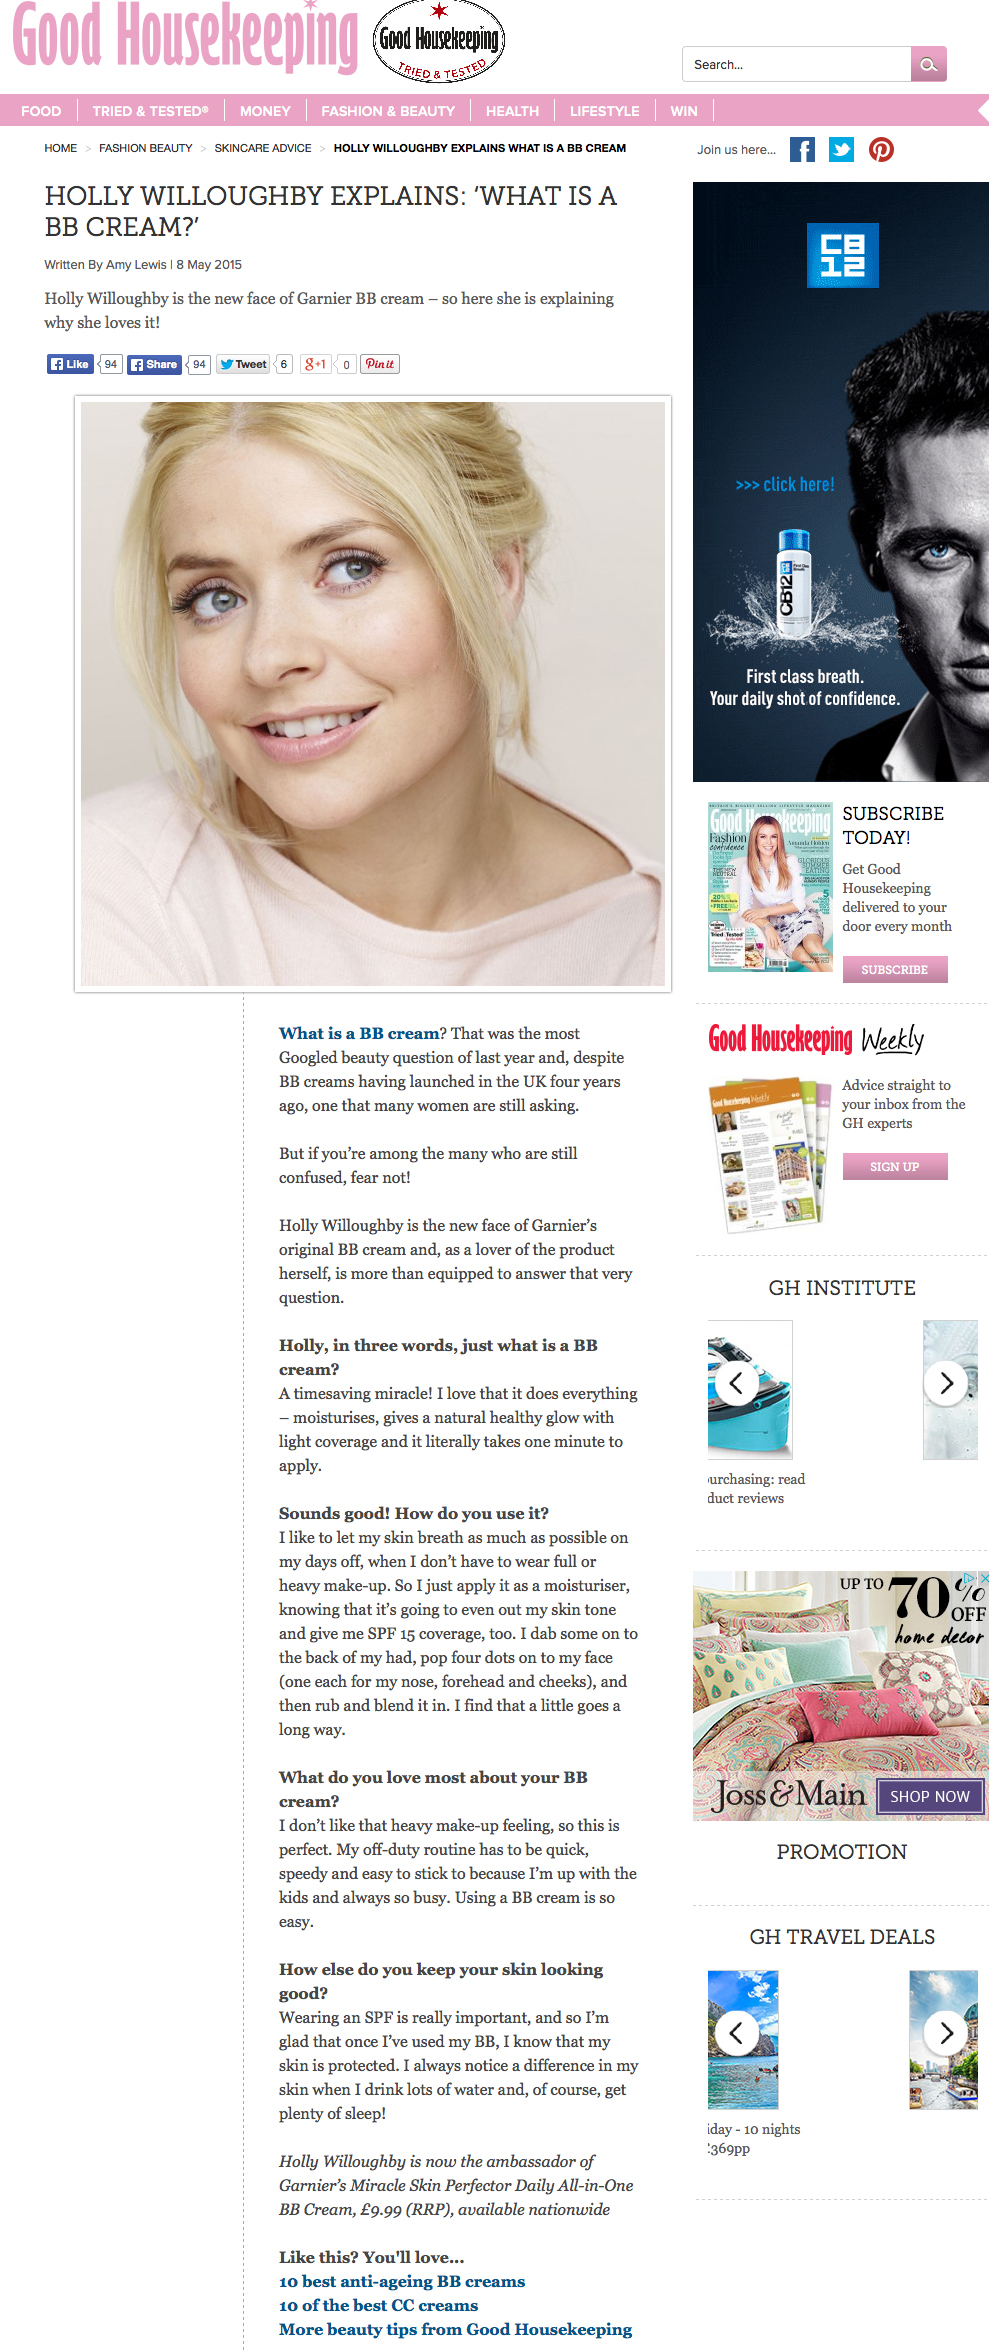 Holly_Willoughby_explains_What_is_a_BB_cream_-_Garnier_BB_Cream_-_Good_Housekeeping_-_2015-05-13_11.50.36 copy